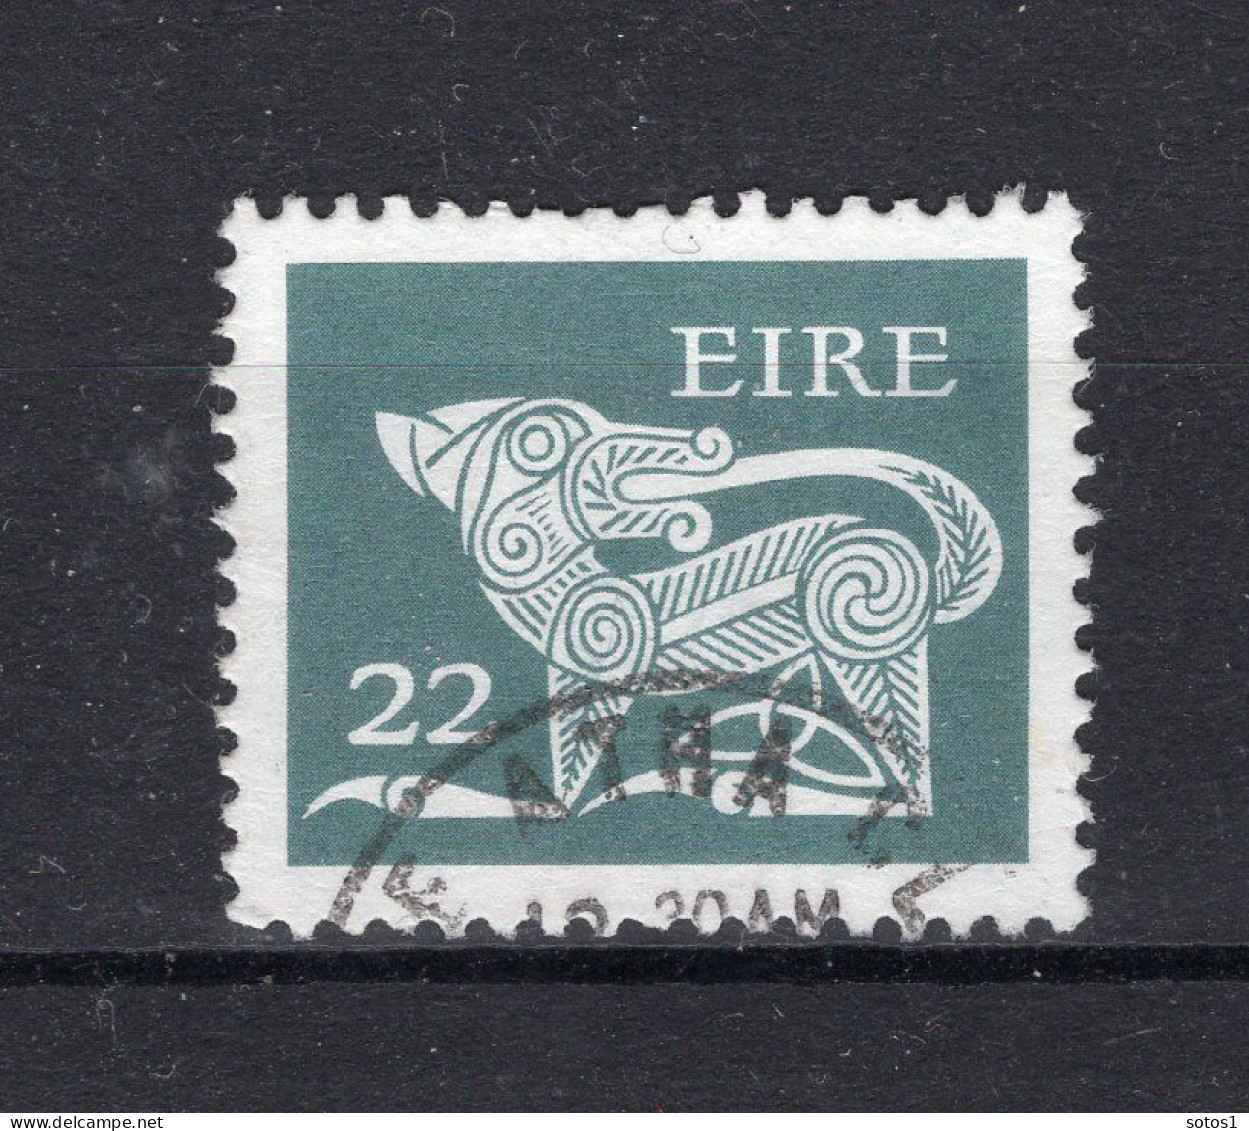 IERLAND Yt. 444° Gestempeld 1981 - Used Stamps